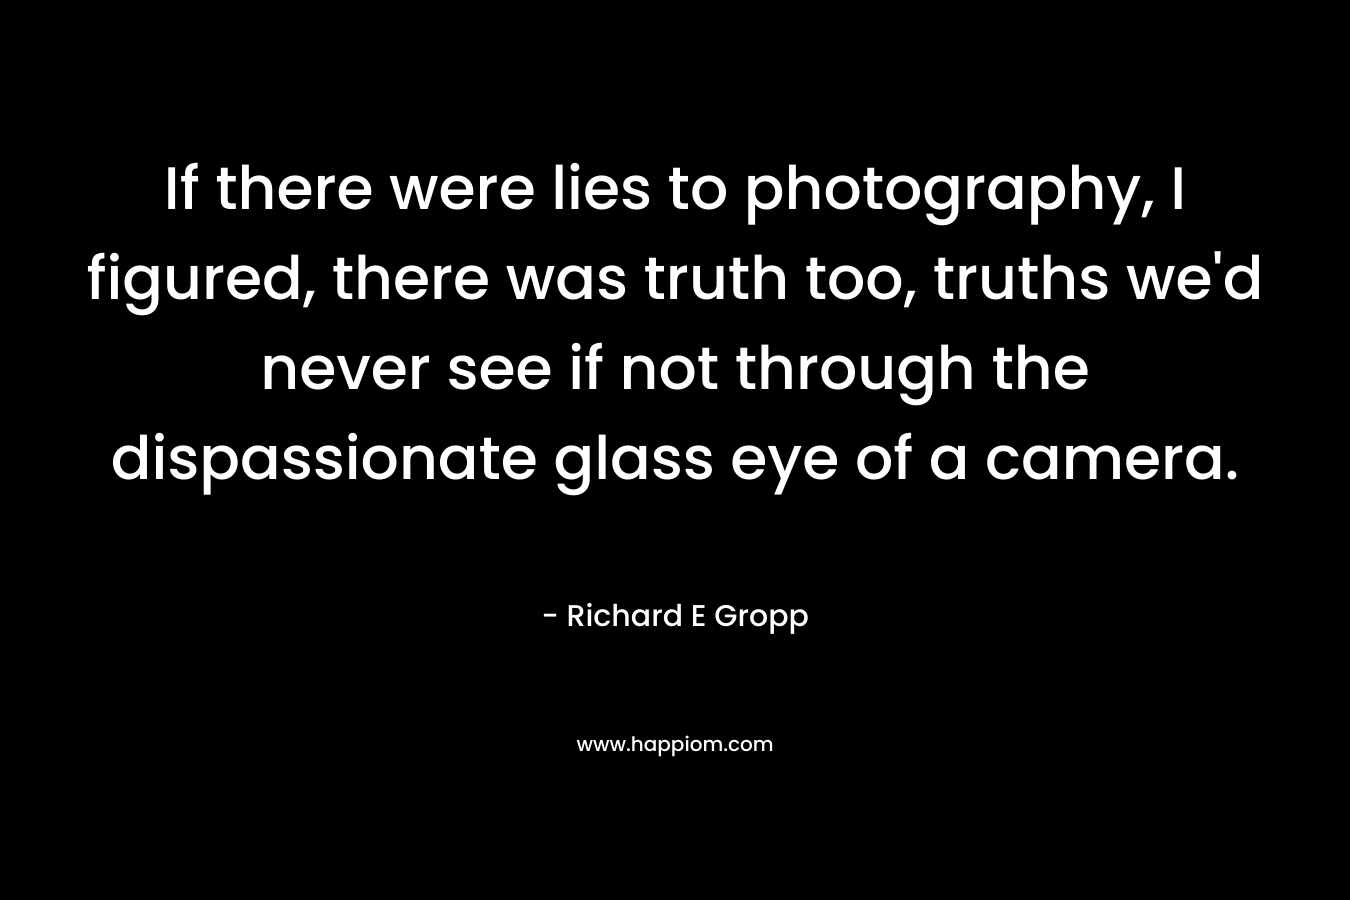 If there were lies to photography, I figured, there was truth too, truths we’d never see if not through the dispassionate glass eye of a camera. – Richard E Gropp